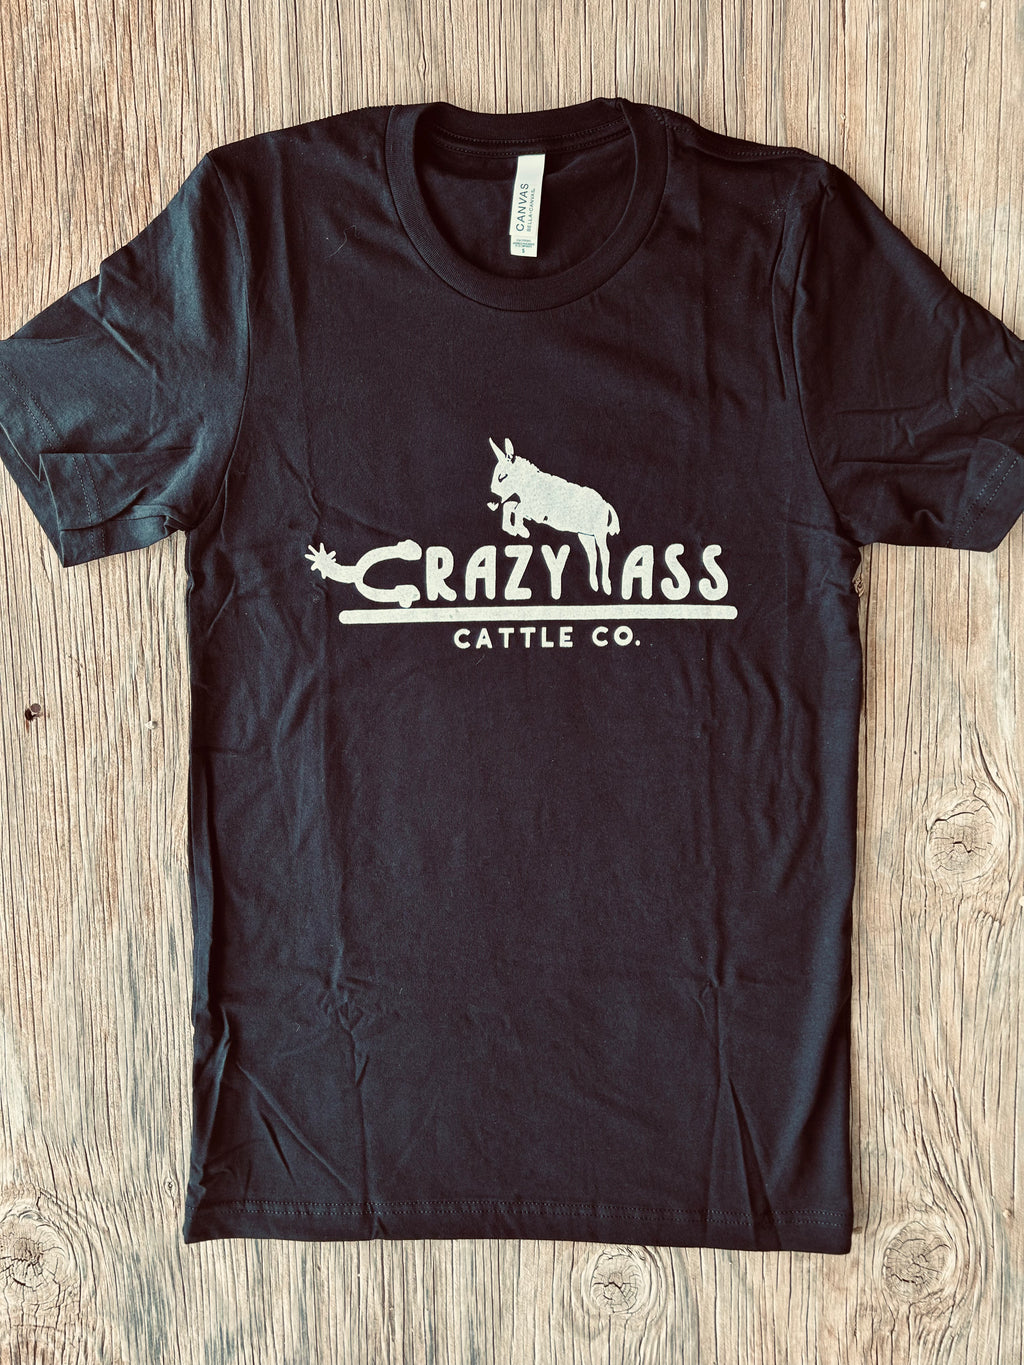 The Crazy Cattle Co Tee